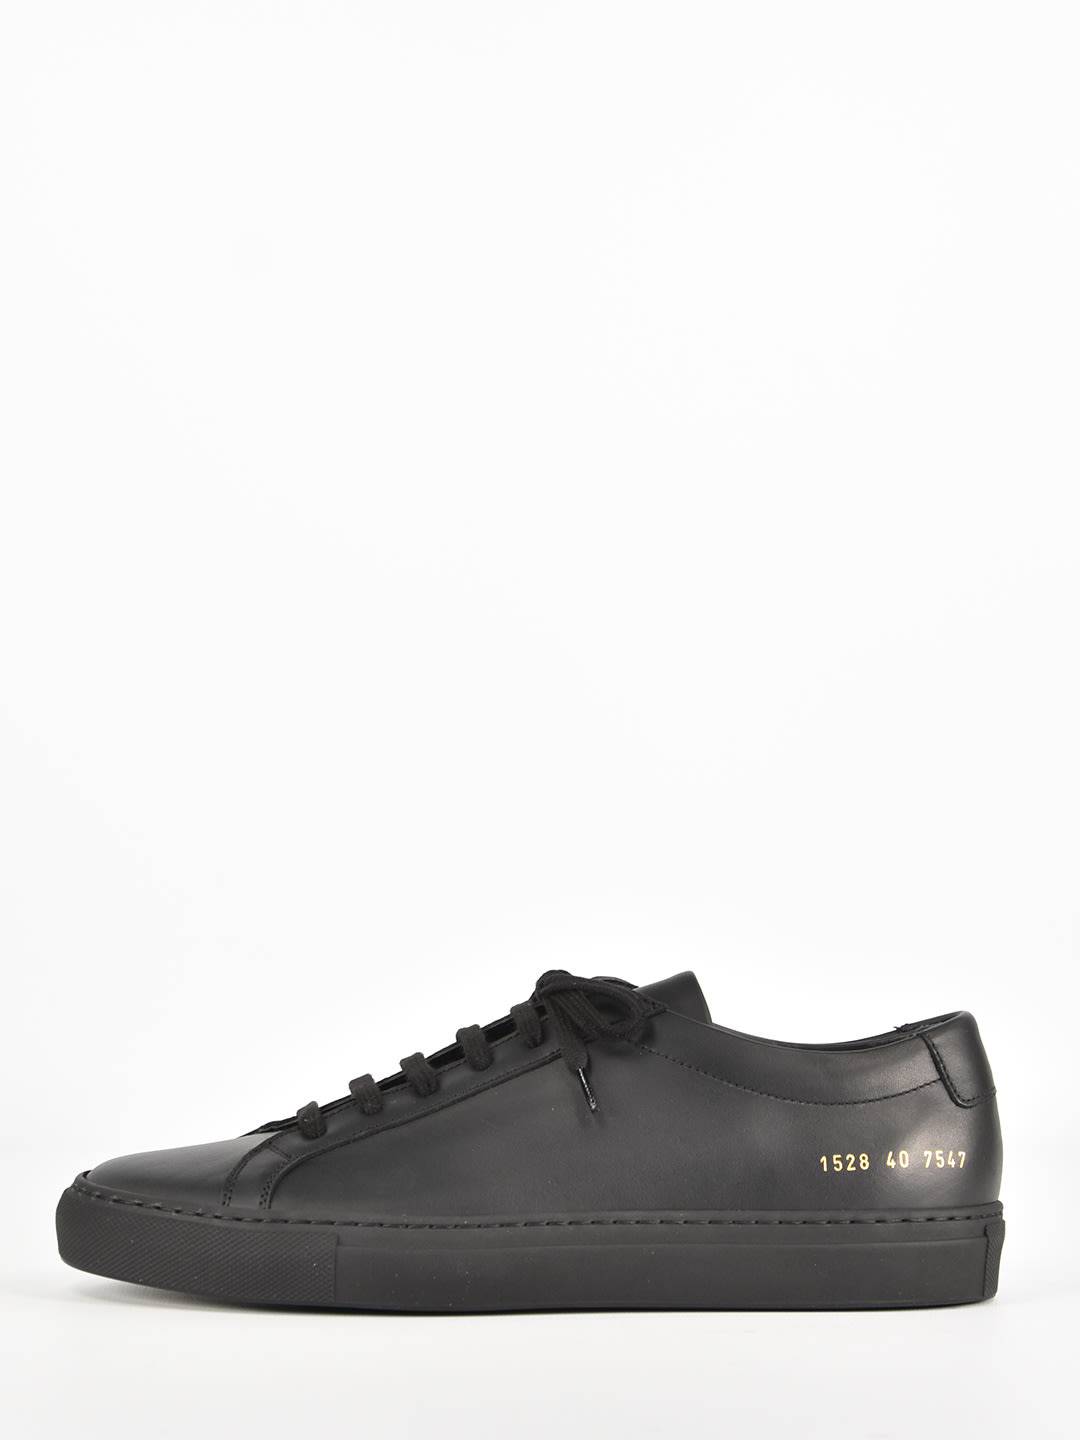 COMMON PROJECTS BLACK ACHILLES SNEAKERS,15287547